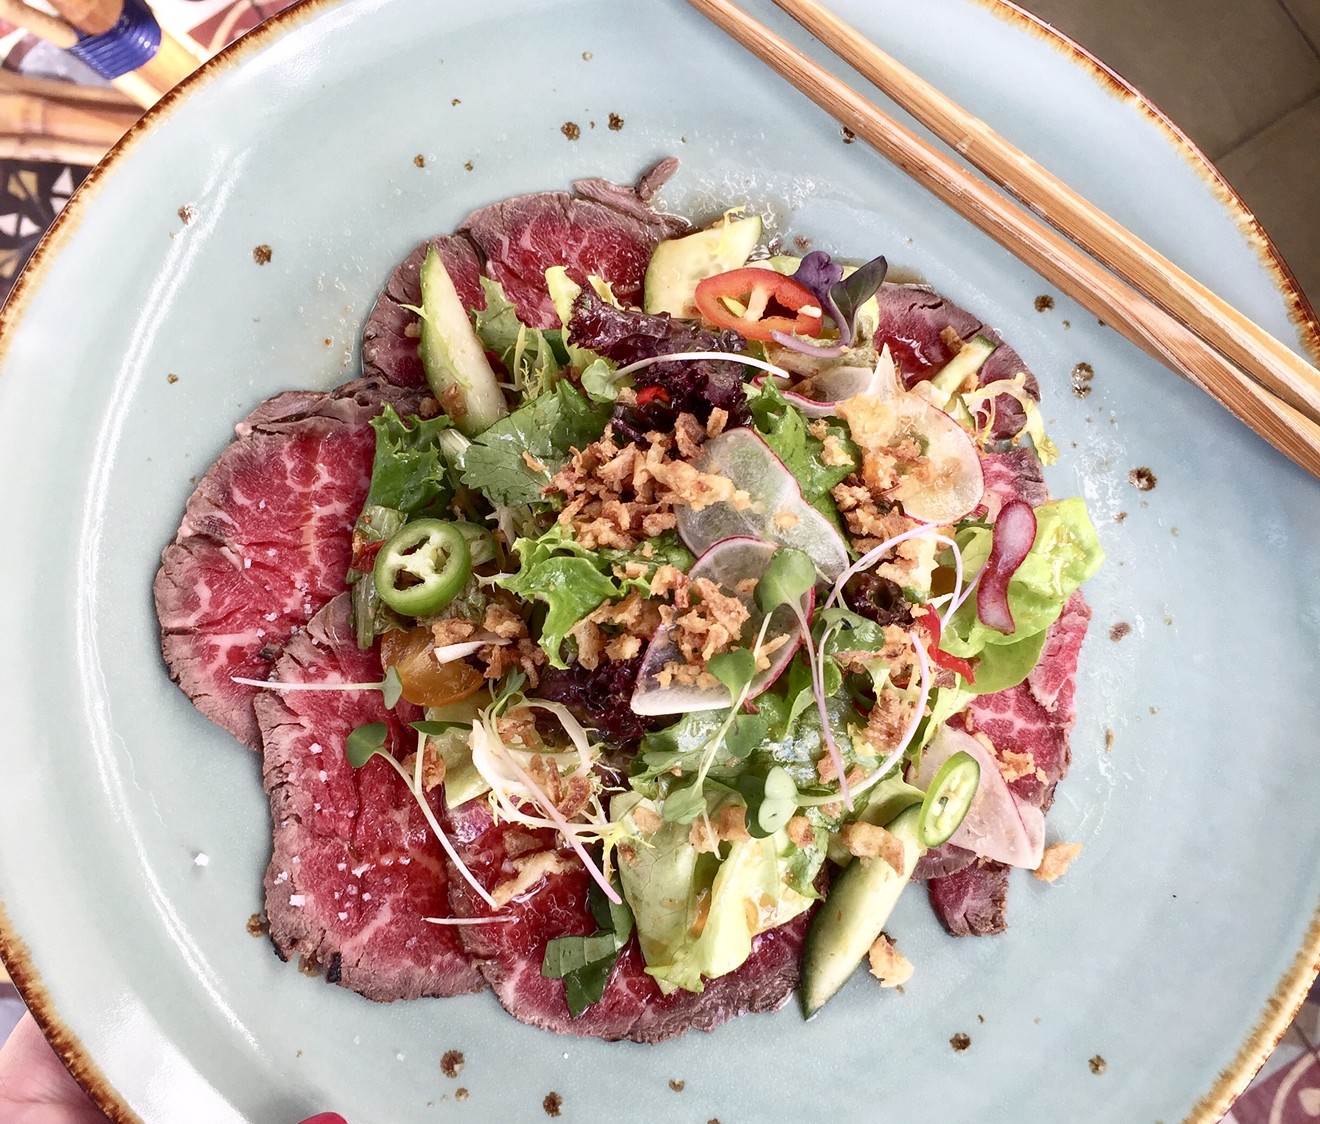 Goi Bo - Vietnamese beef salad at Le Colonial is a stellar example of French-Vietnamese cuisine.